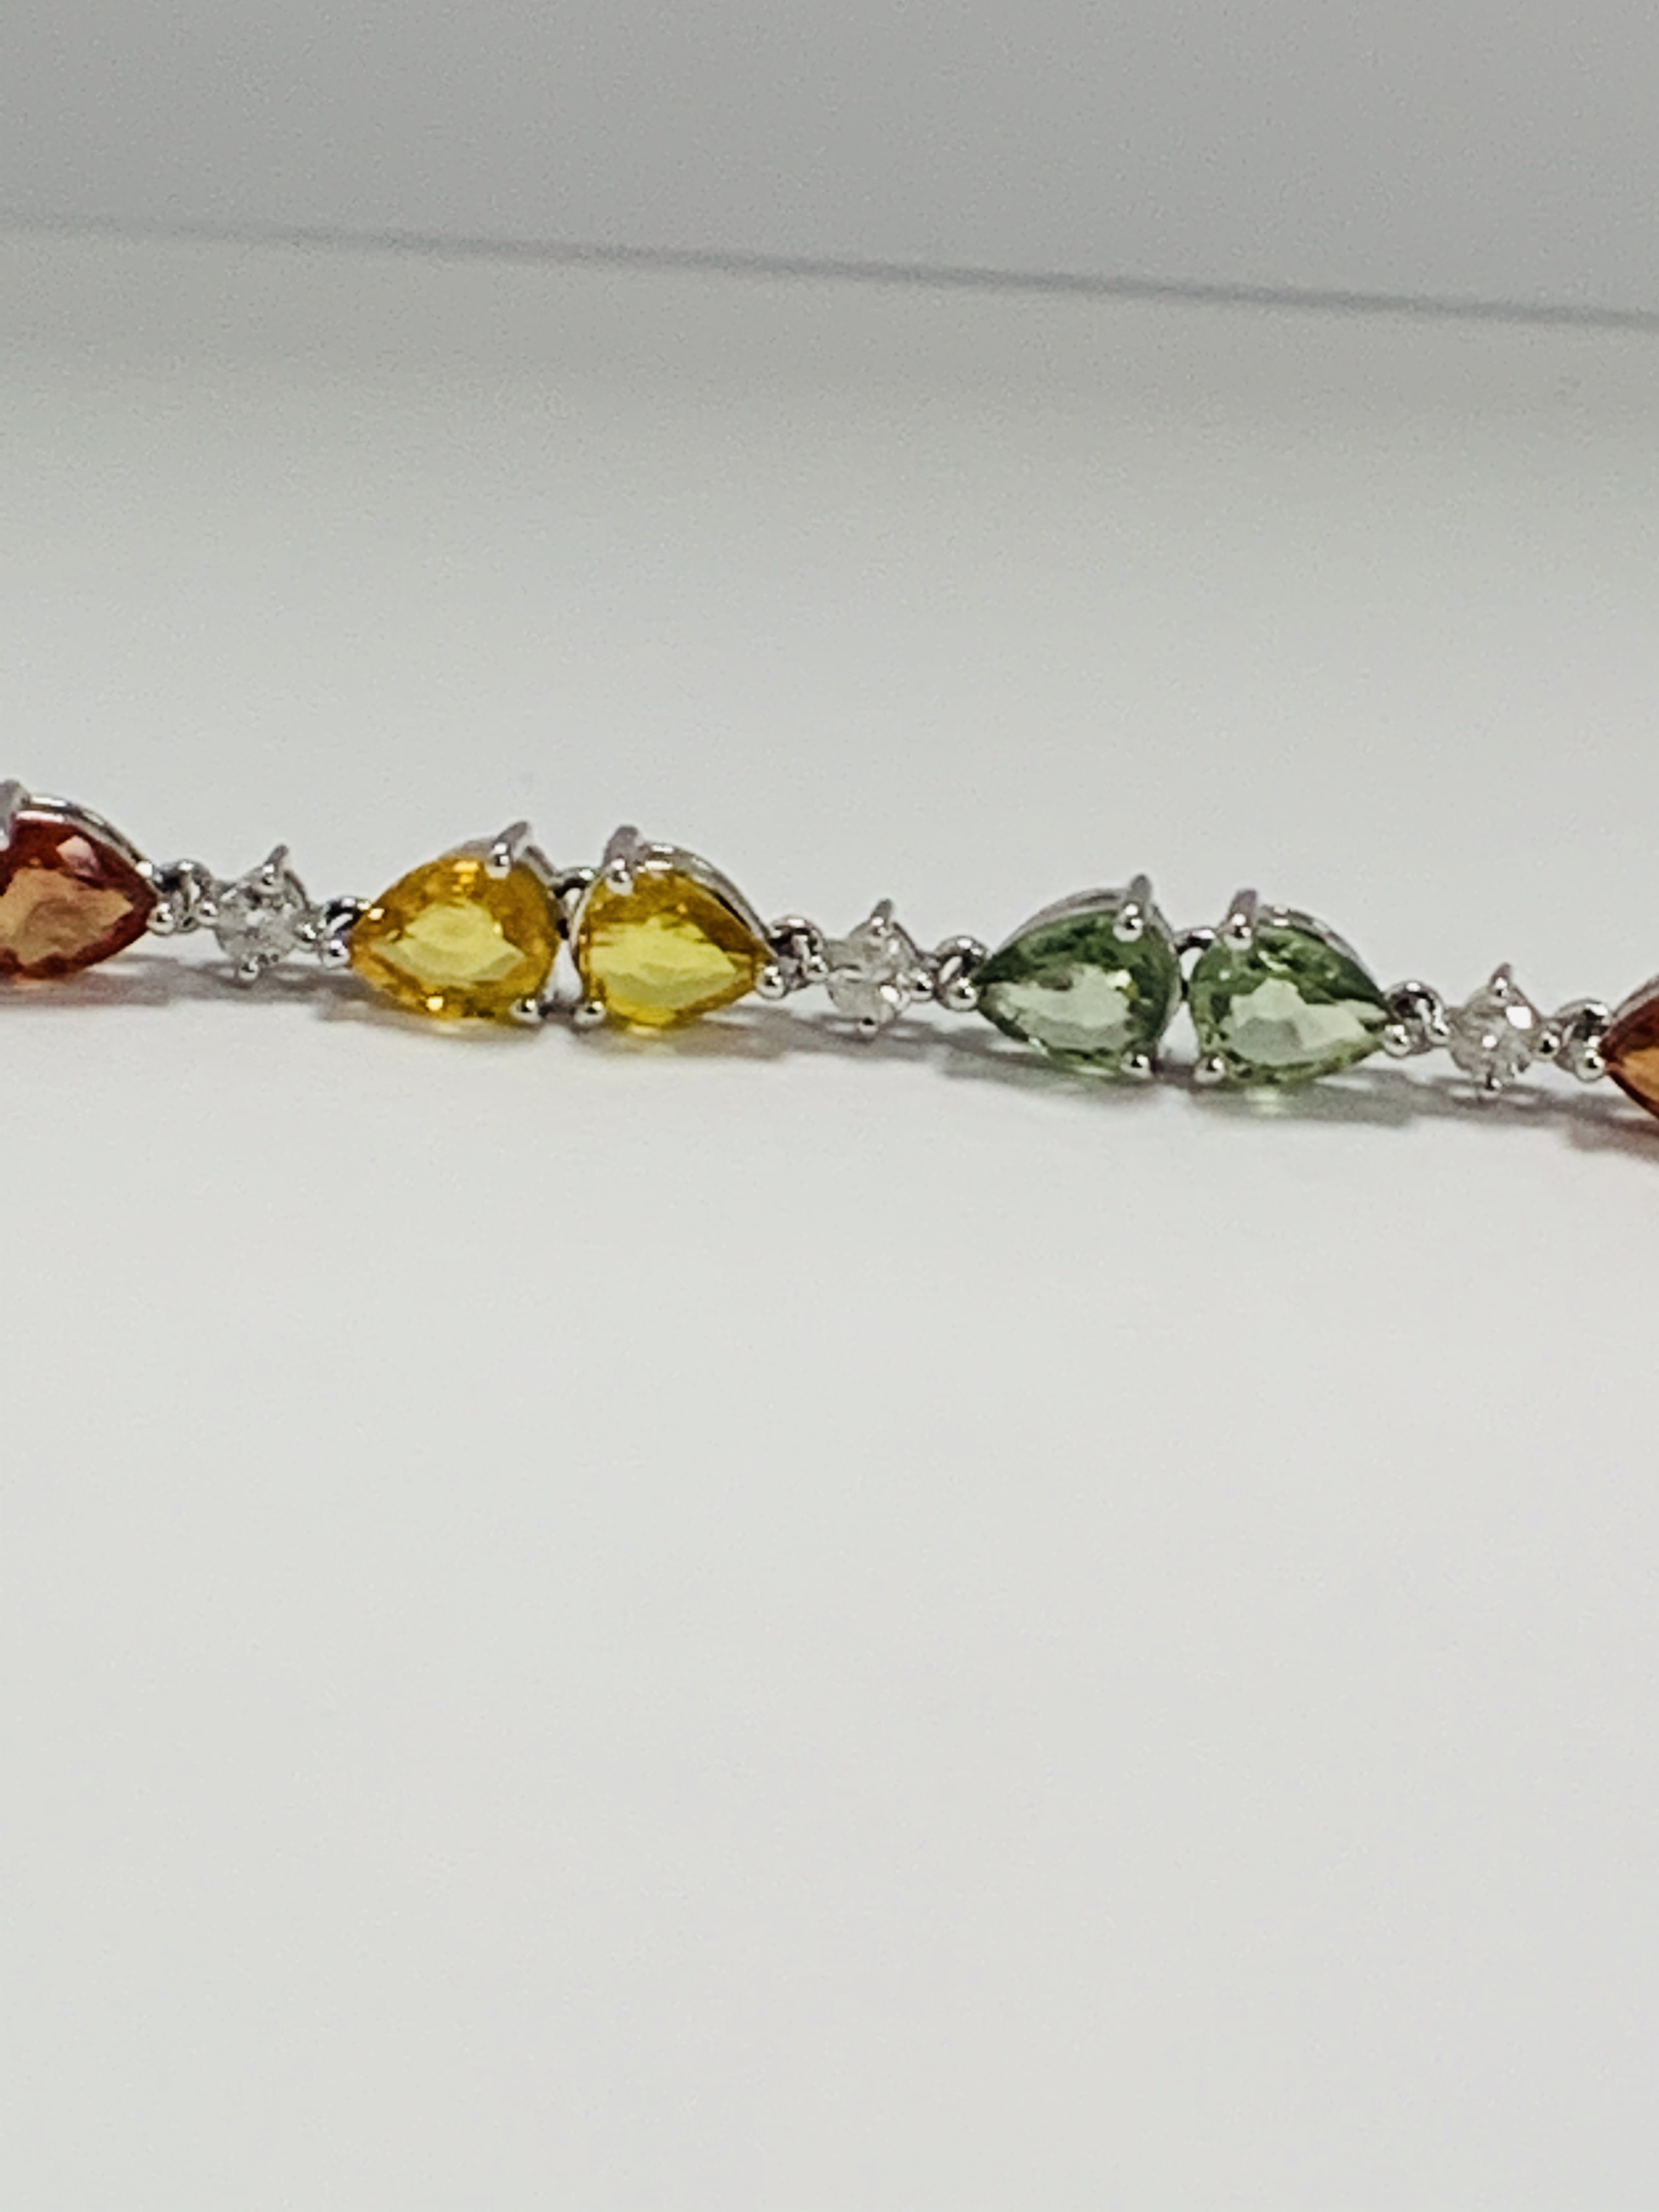 14ct White Gold Sapphire and Diamond bracelet featuring, 22 pear cut, yellow, green and orange Sapph - Image 6 of 24